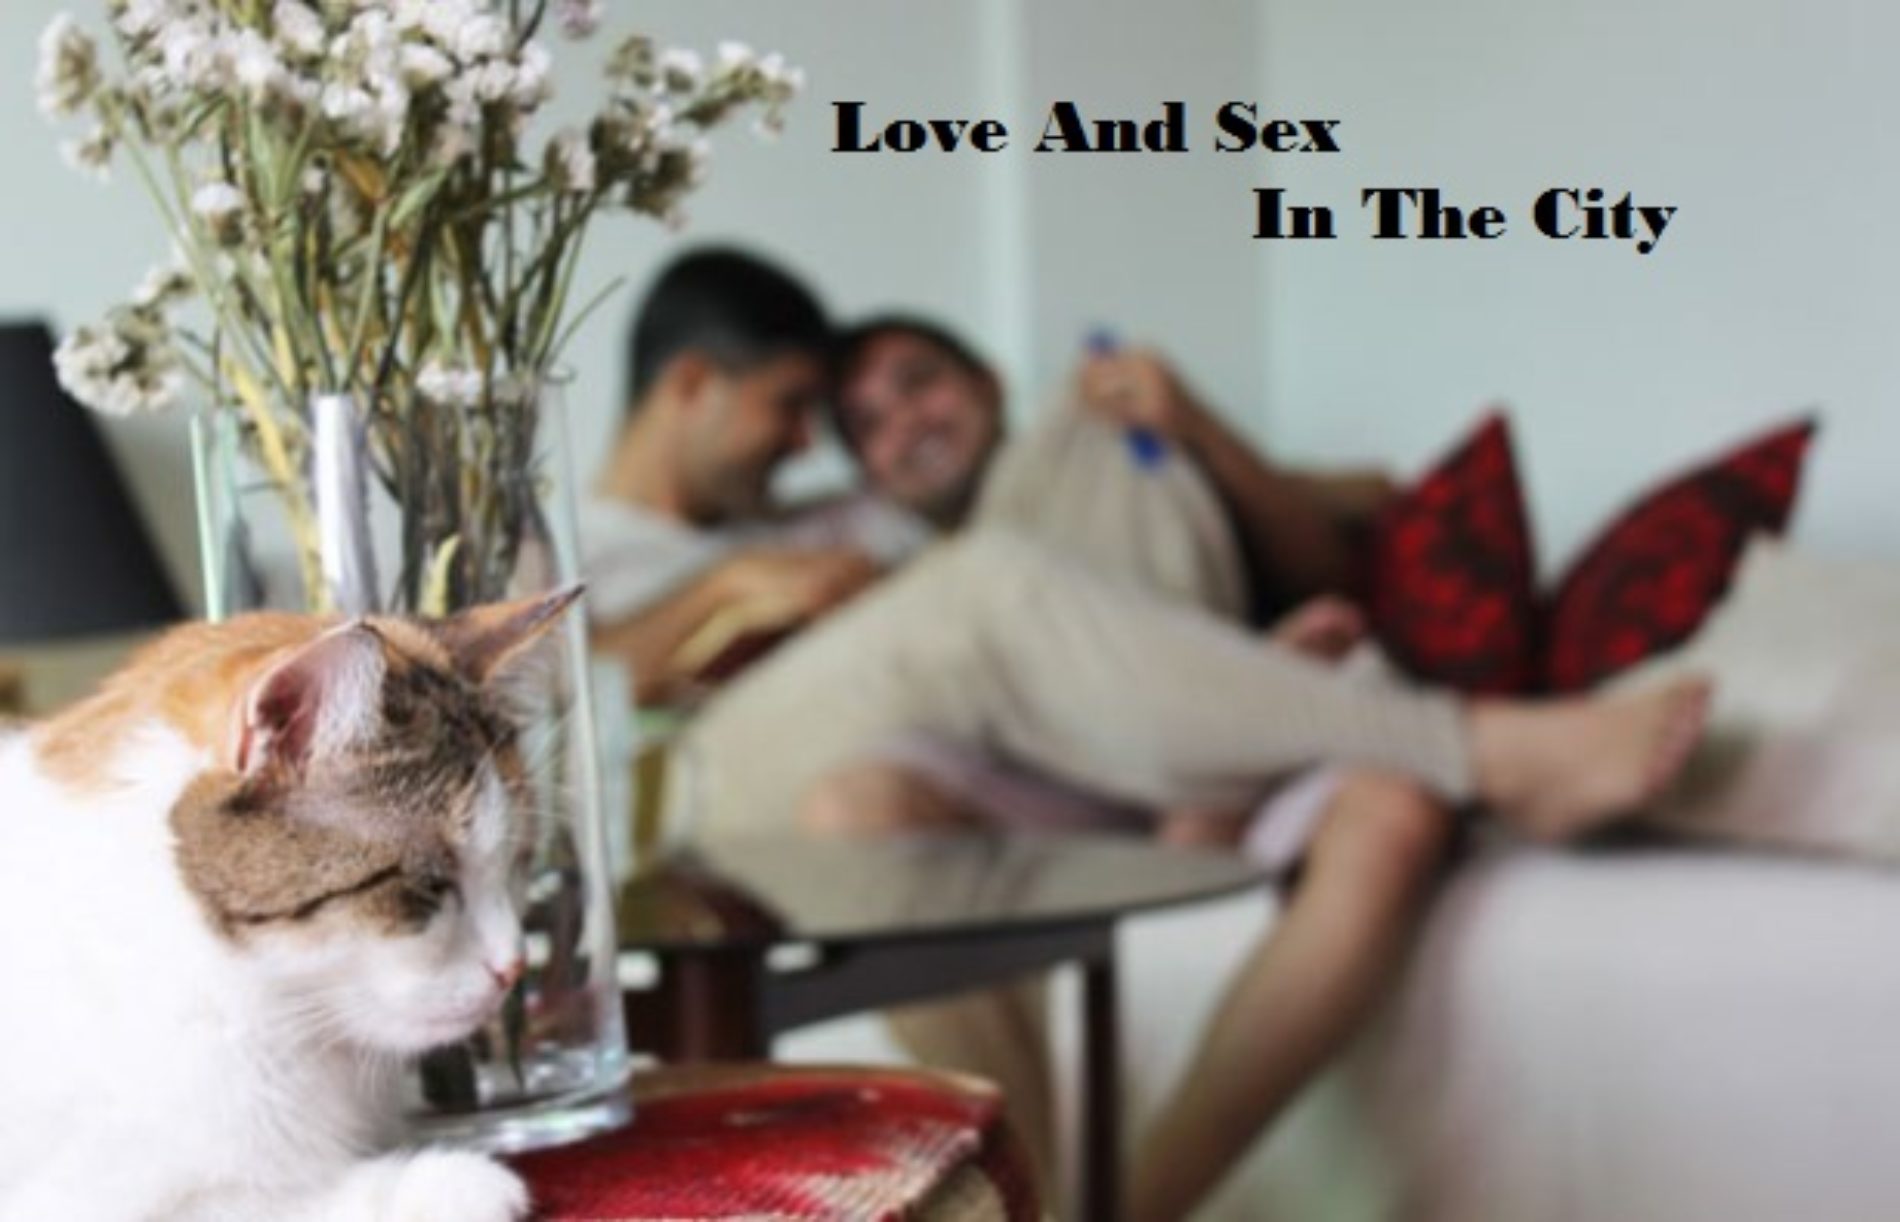 LOVE AND SEX IN THE CITY (Episode 25)